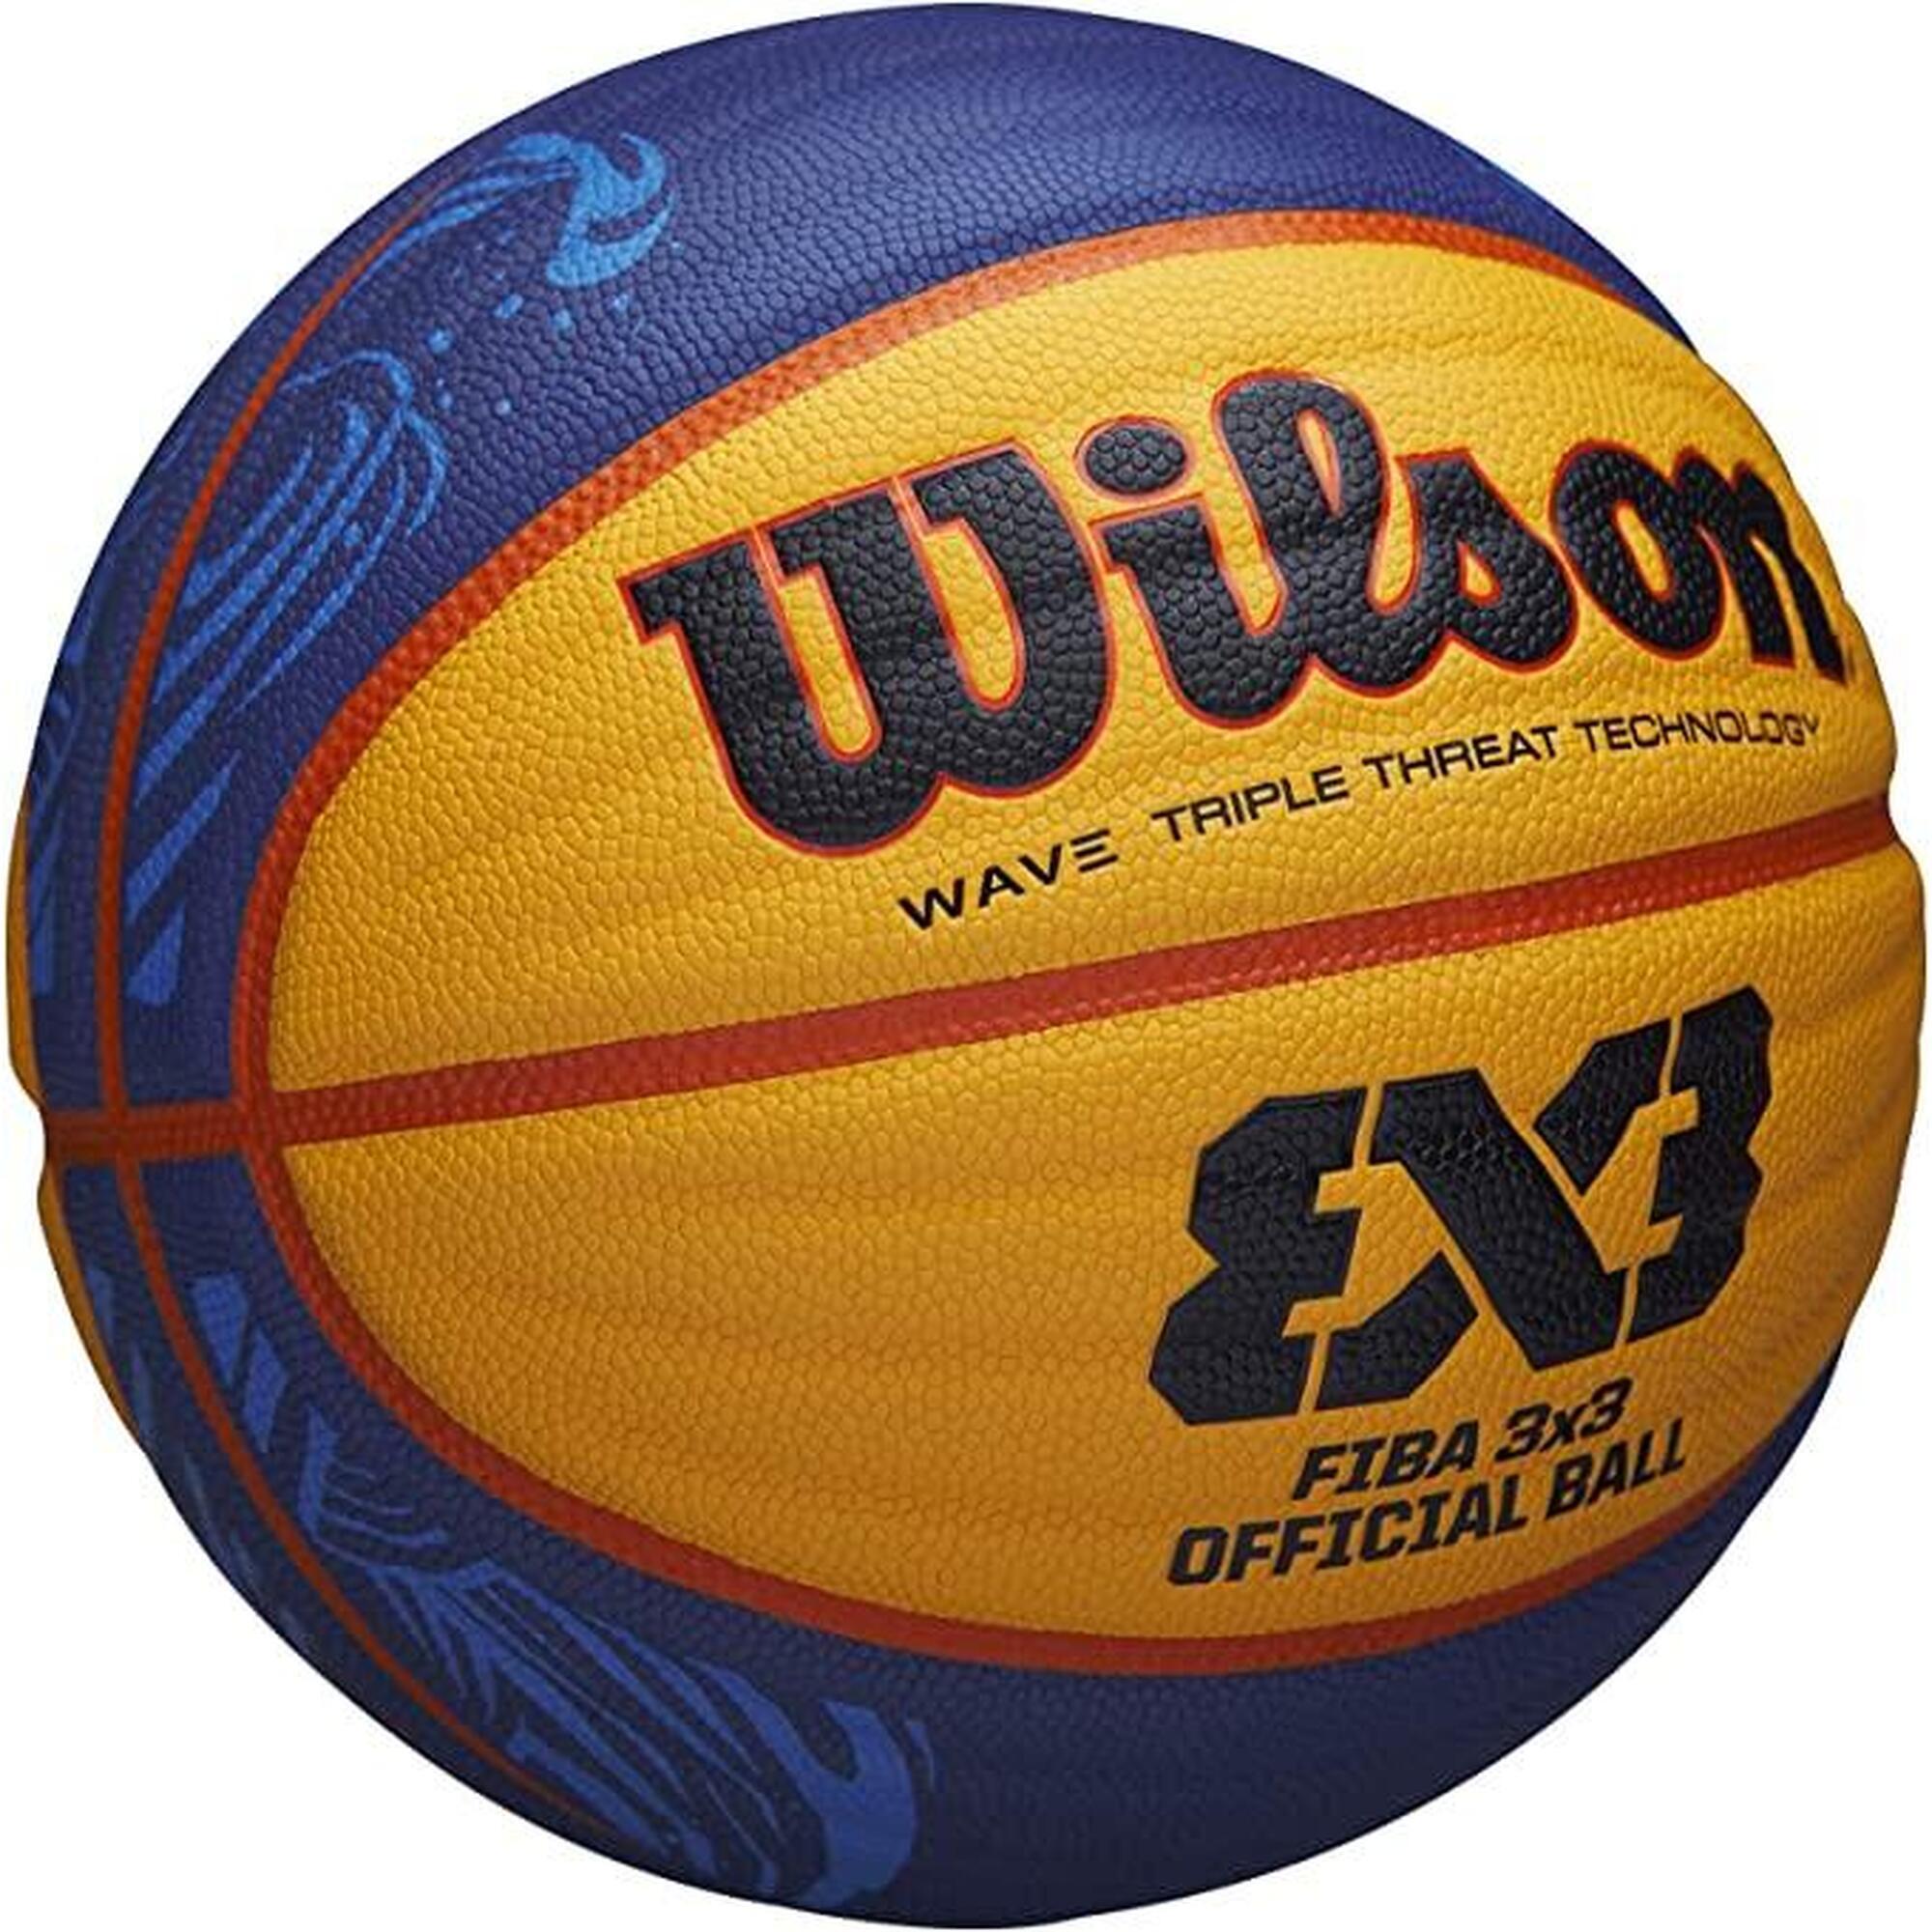 Limited Edition (PU) FIBA 3x3 Official Game Basketball Size 6 - Blue/Yellow